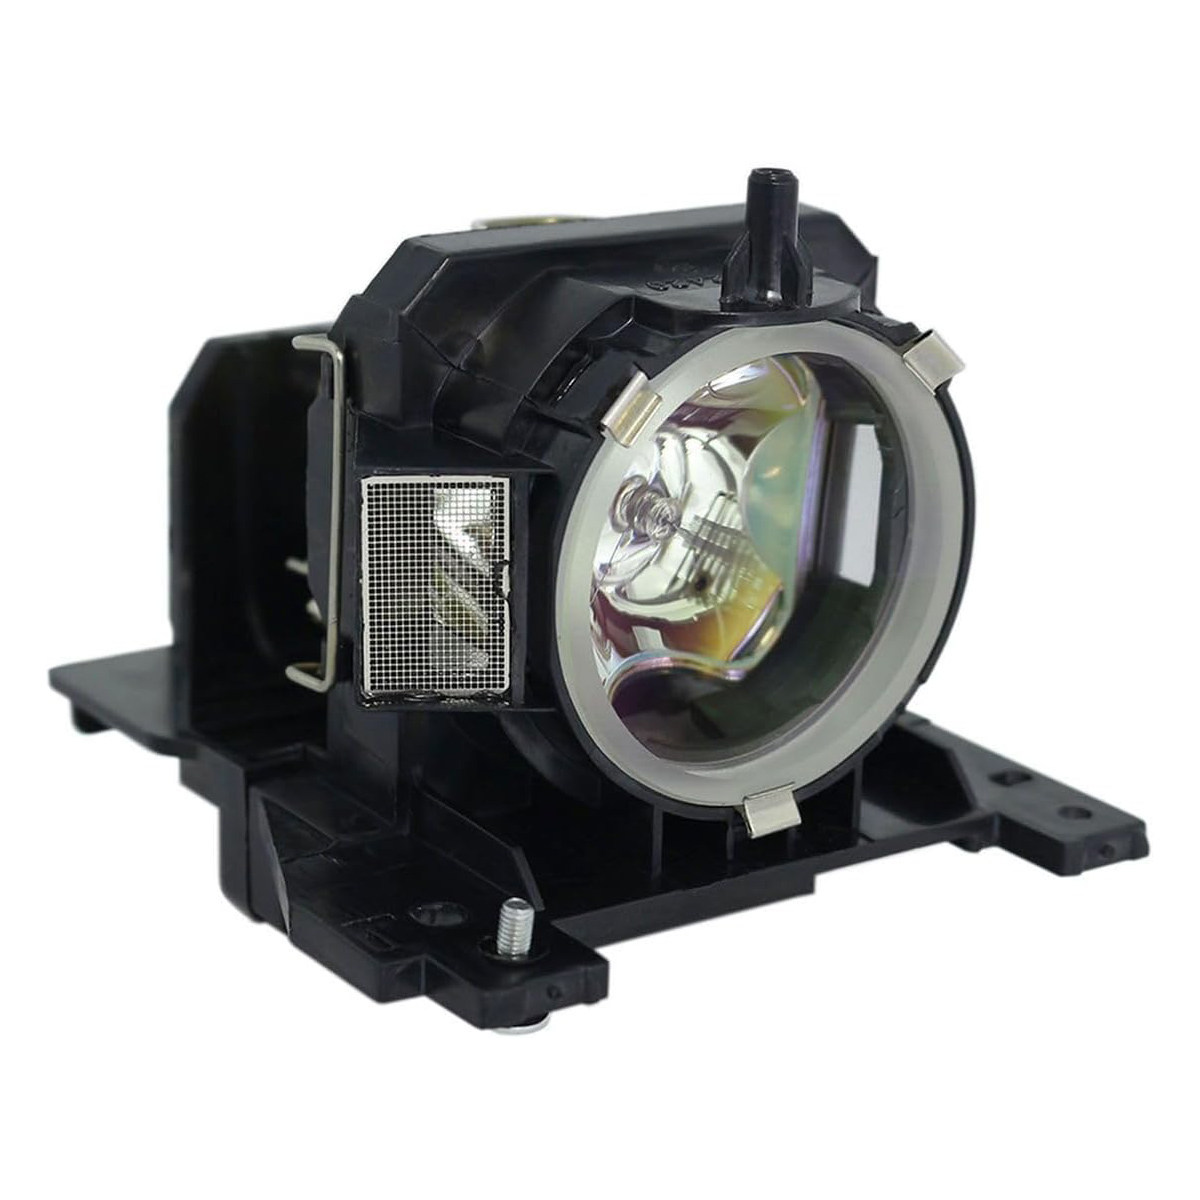 Replacement Projector lamp 78-6969-9917-2 For X64 X64W X66